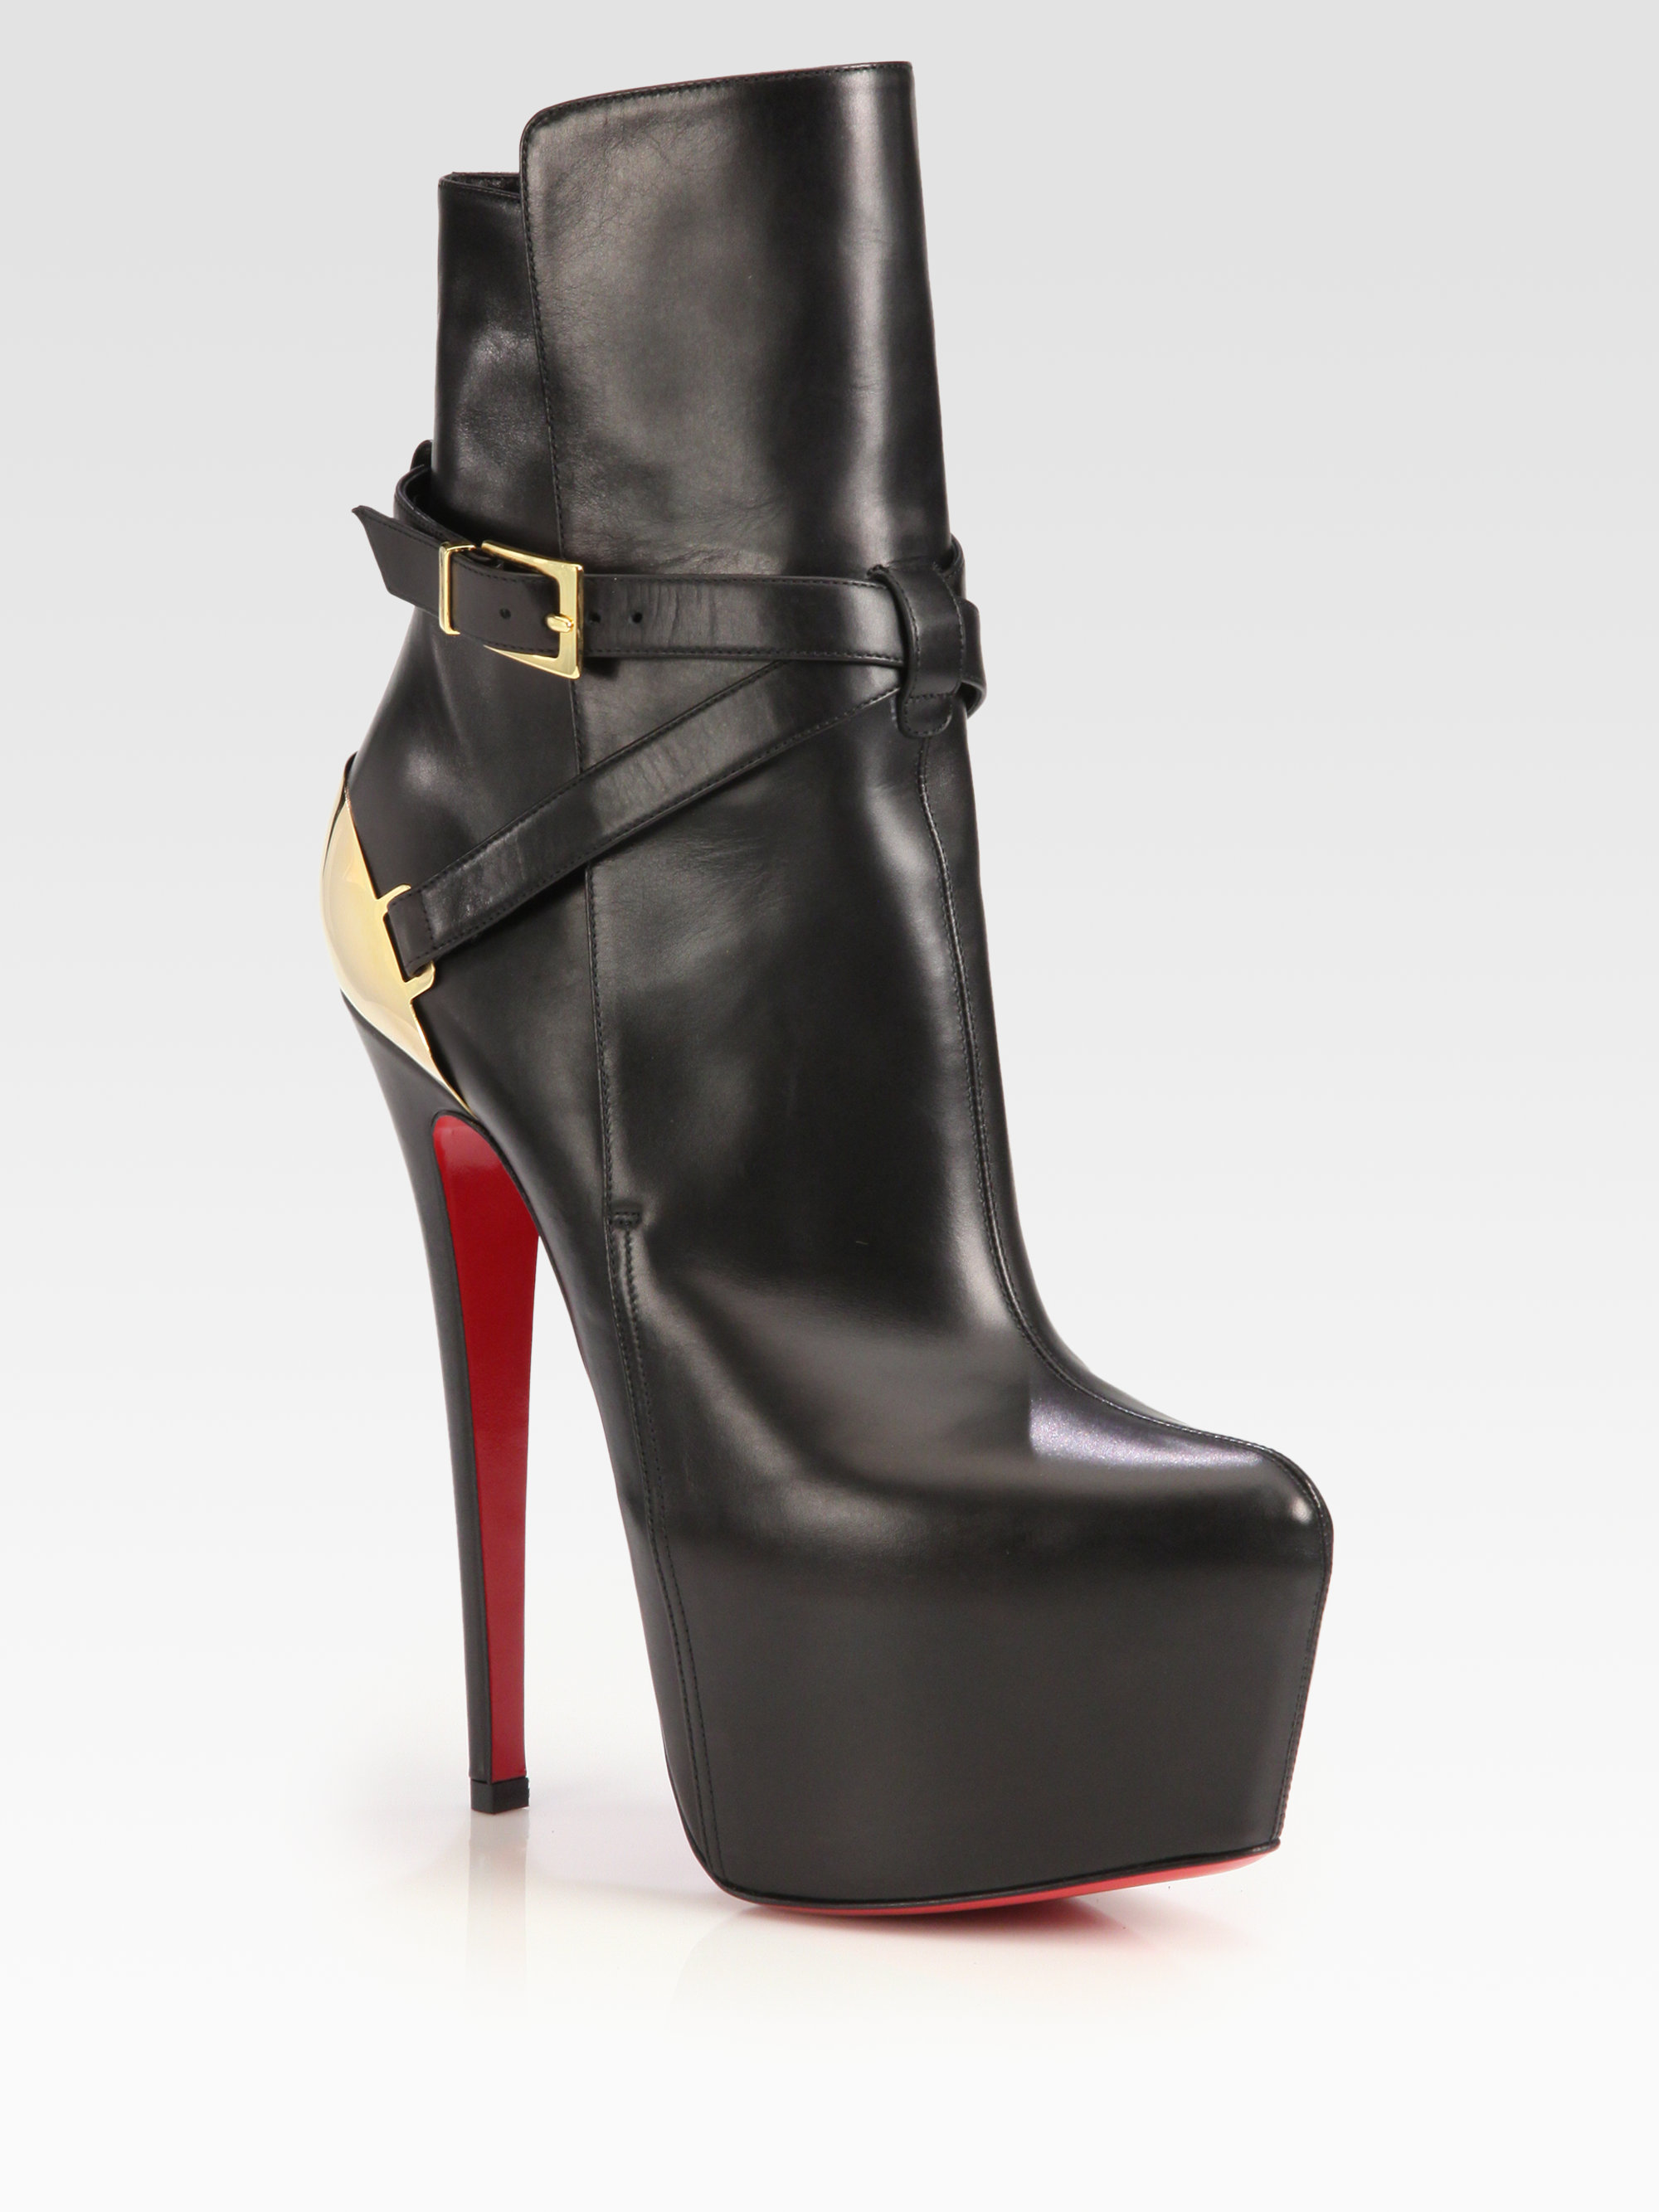 christian-louboutin-black-equestria-leather-platform-ankle-boots-product-1-7882617-868431135.jpeg  